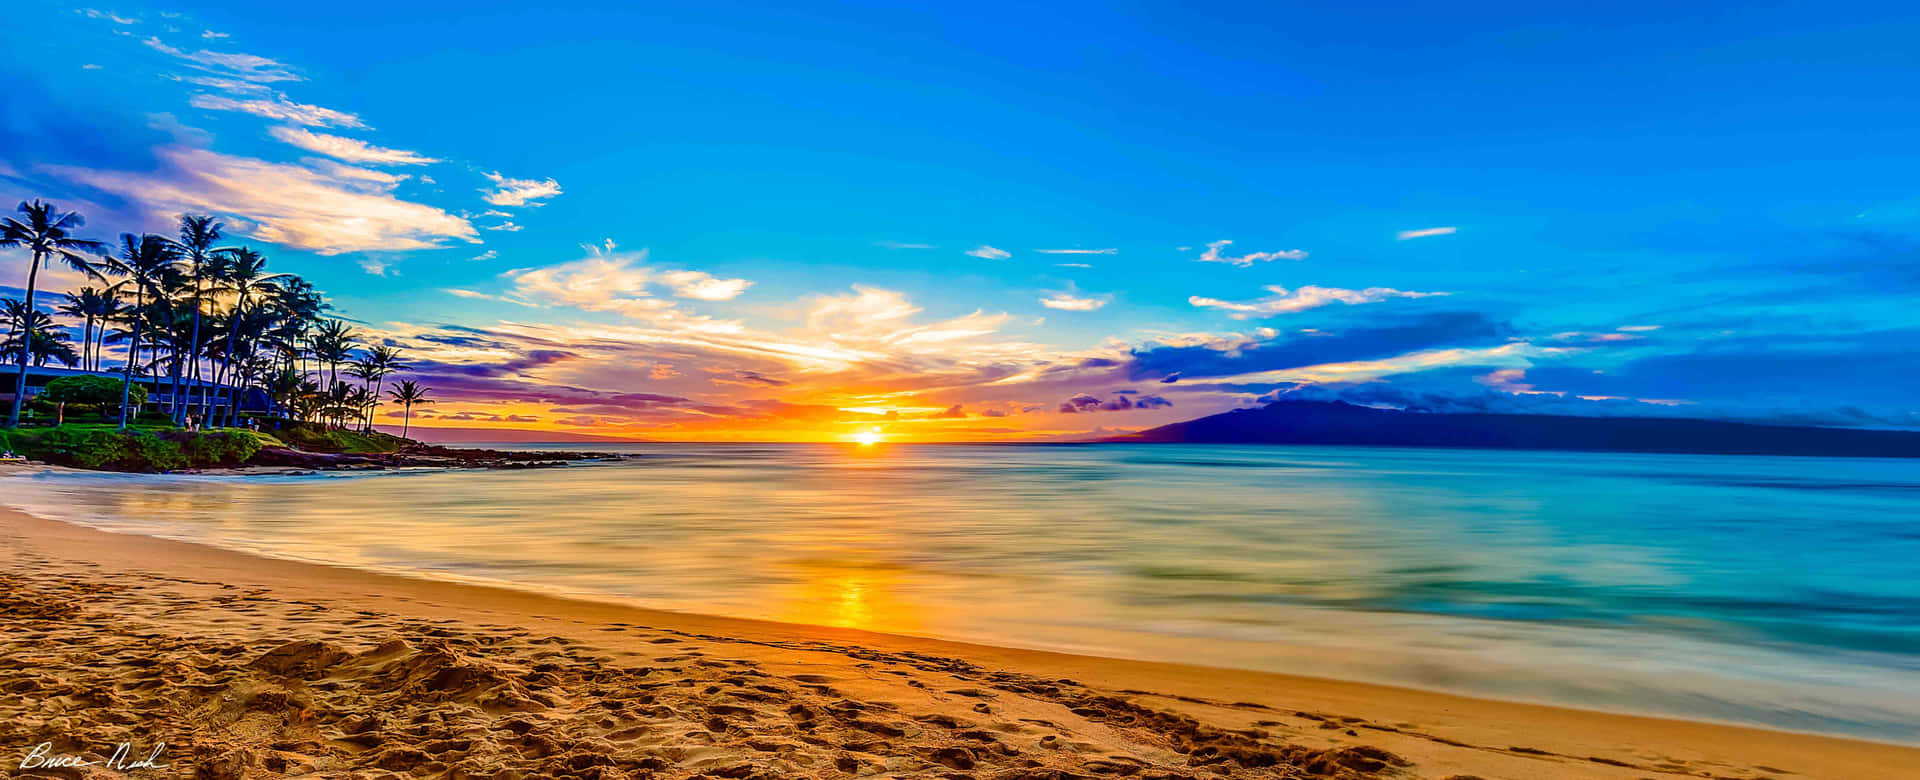 Embrace the sunset from your favorite beach.